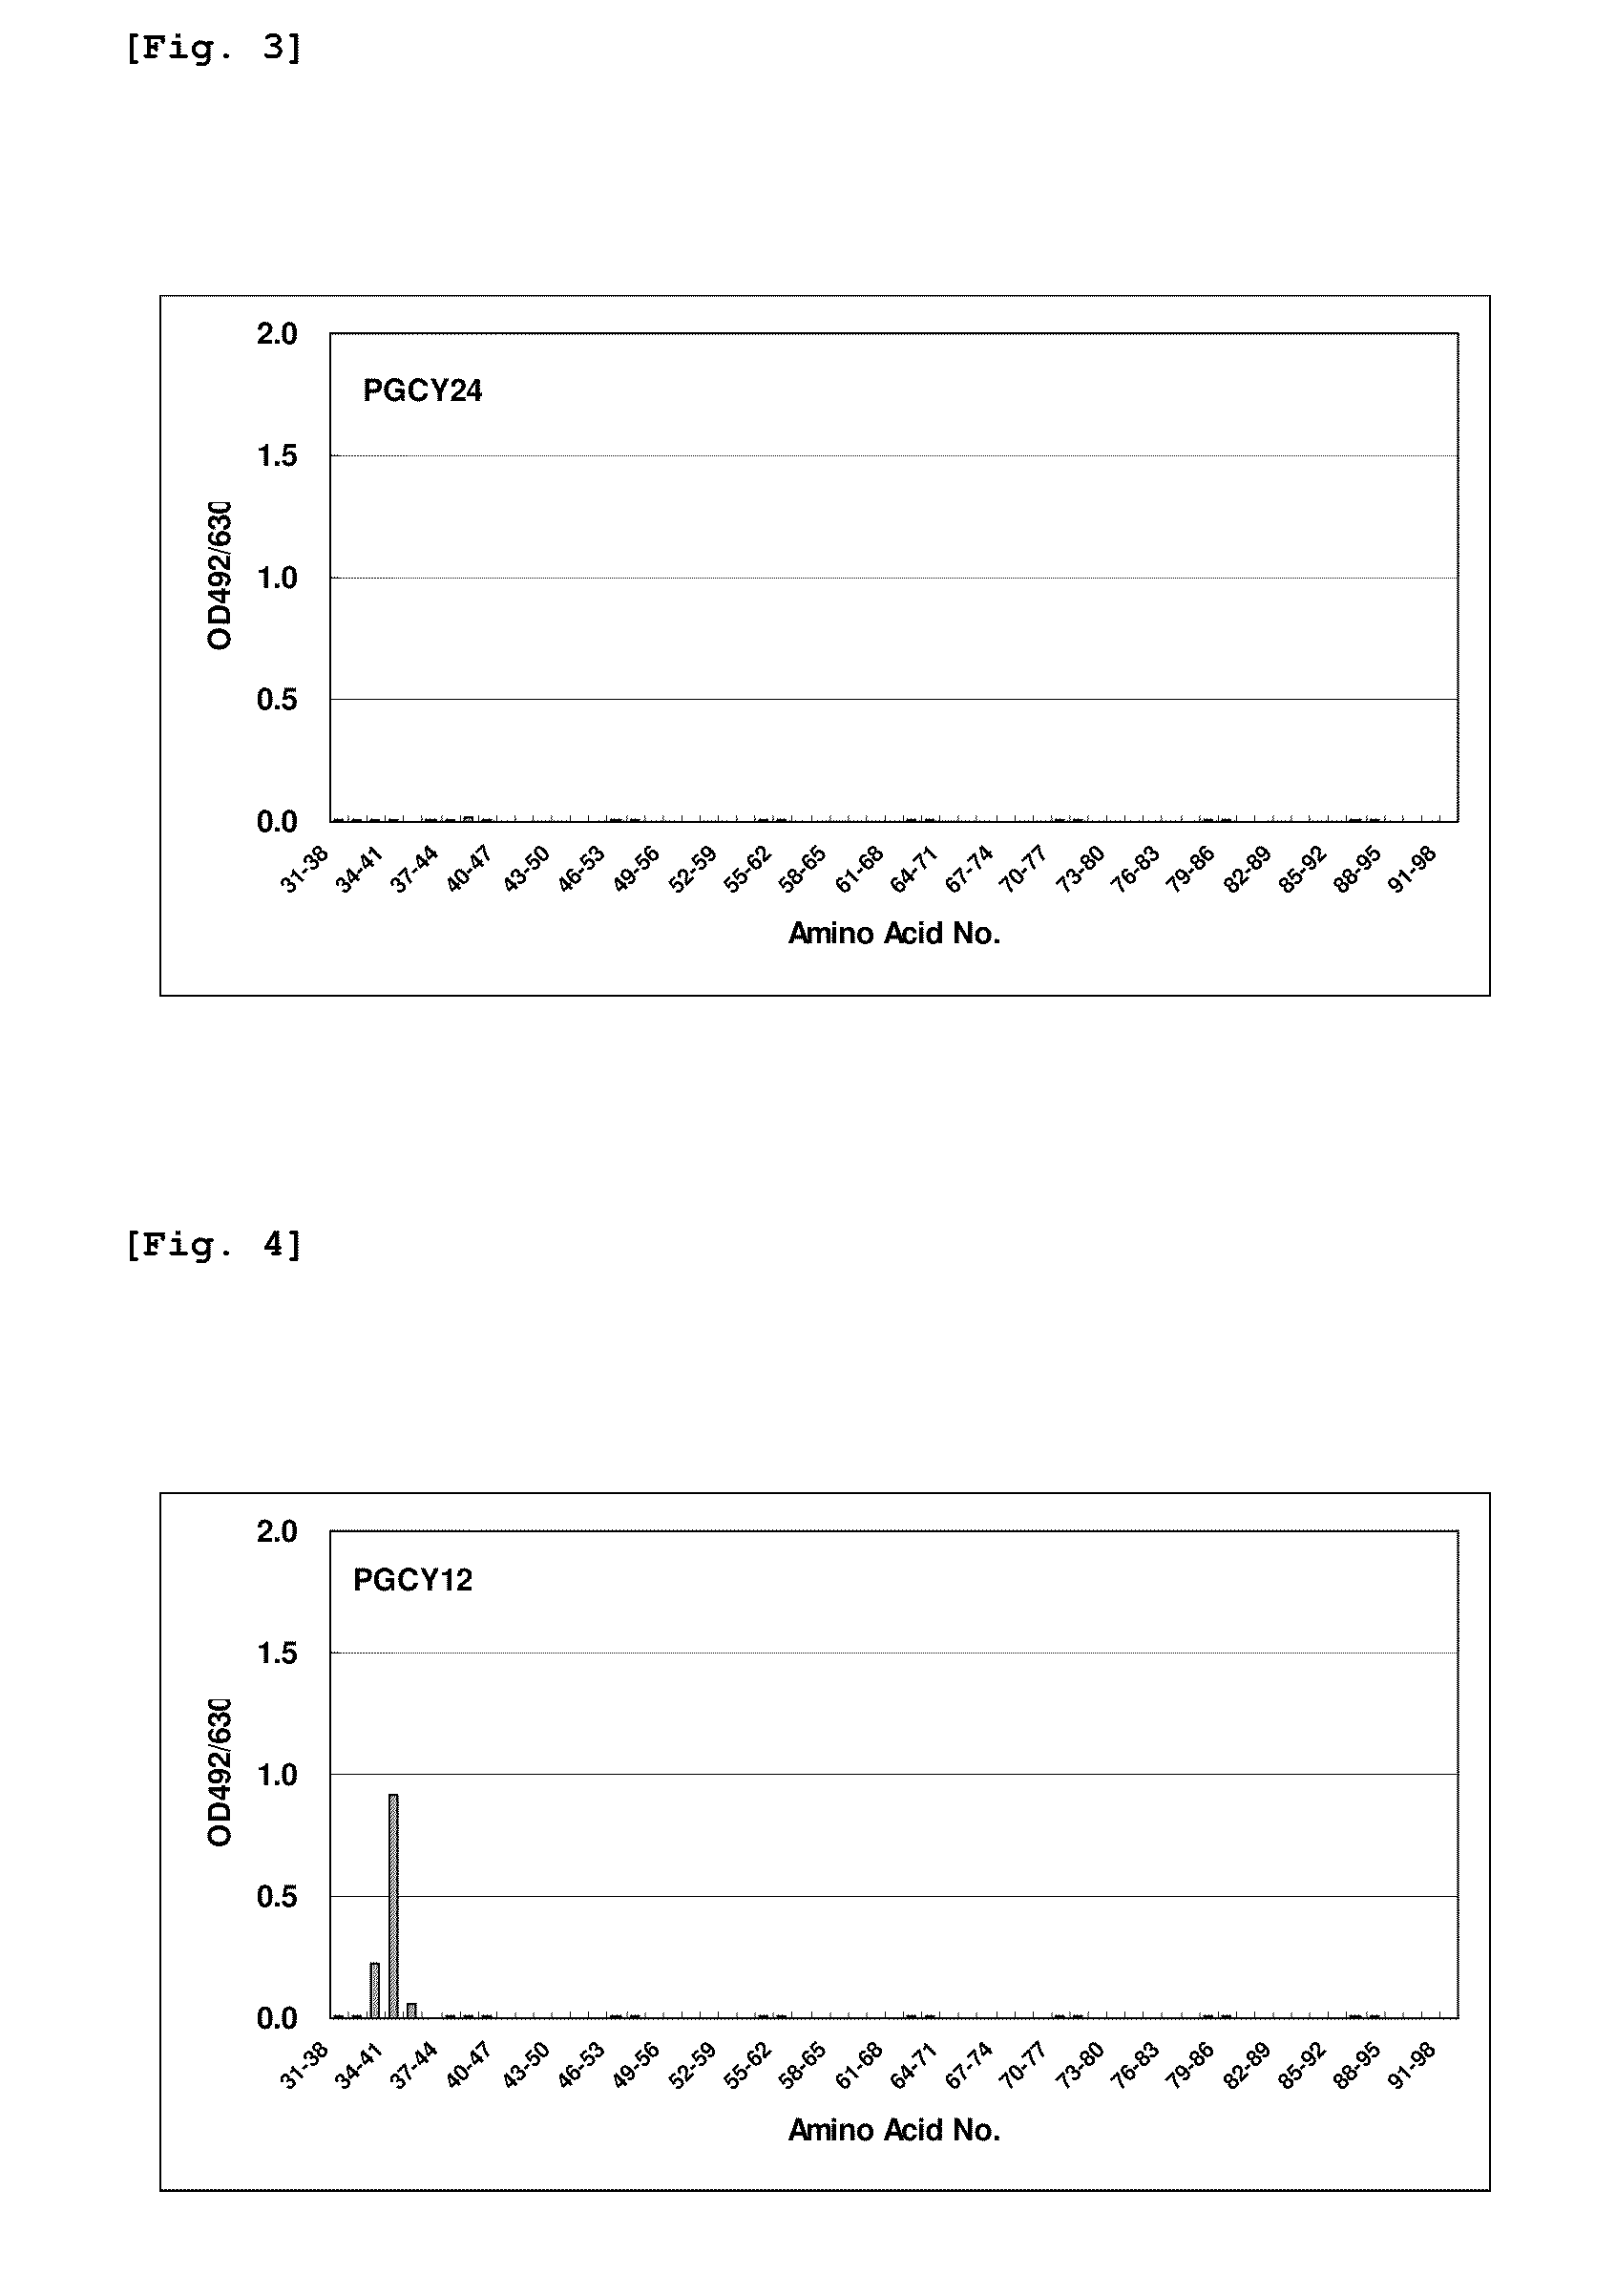 Antibody directed against pro-gastrin releasing peptide, and use thereof